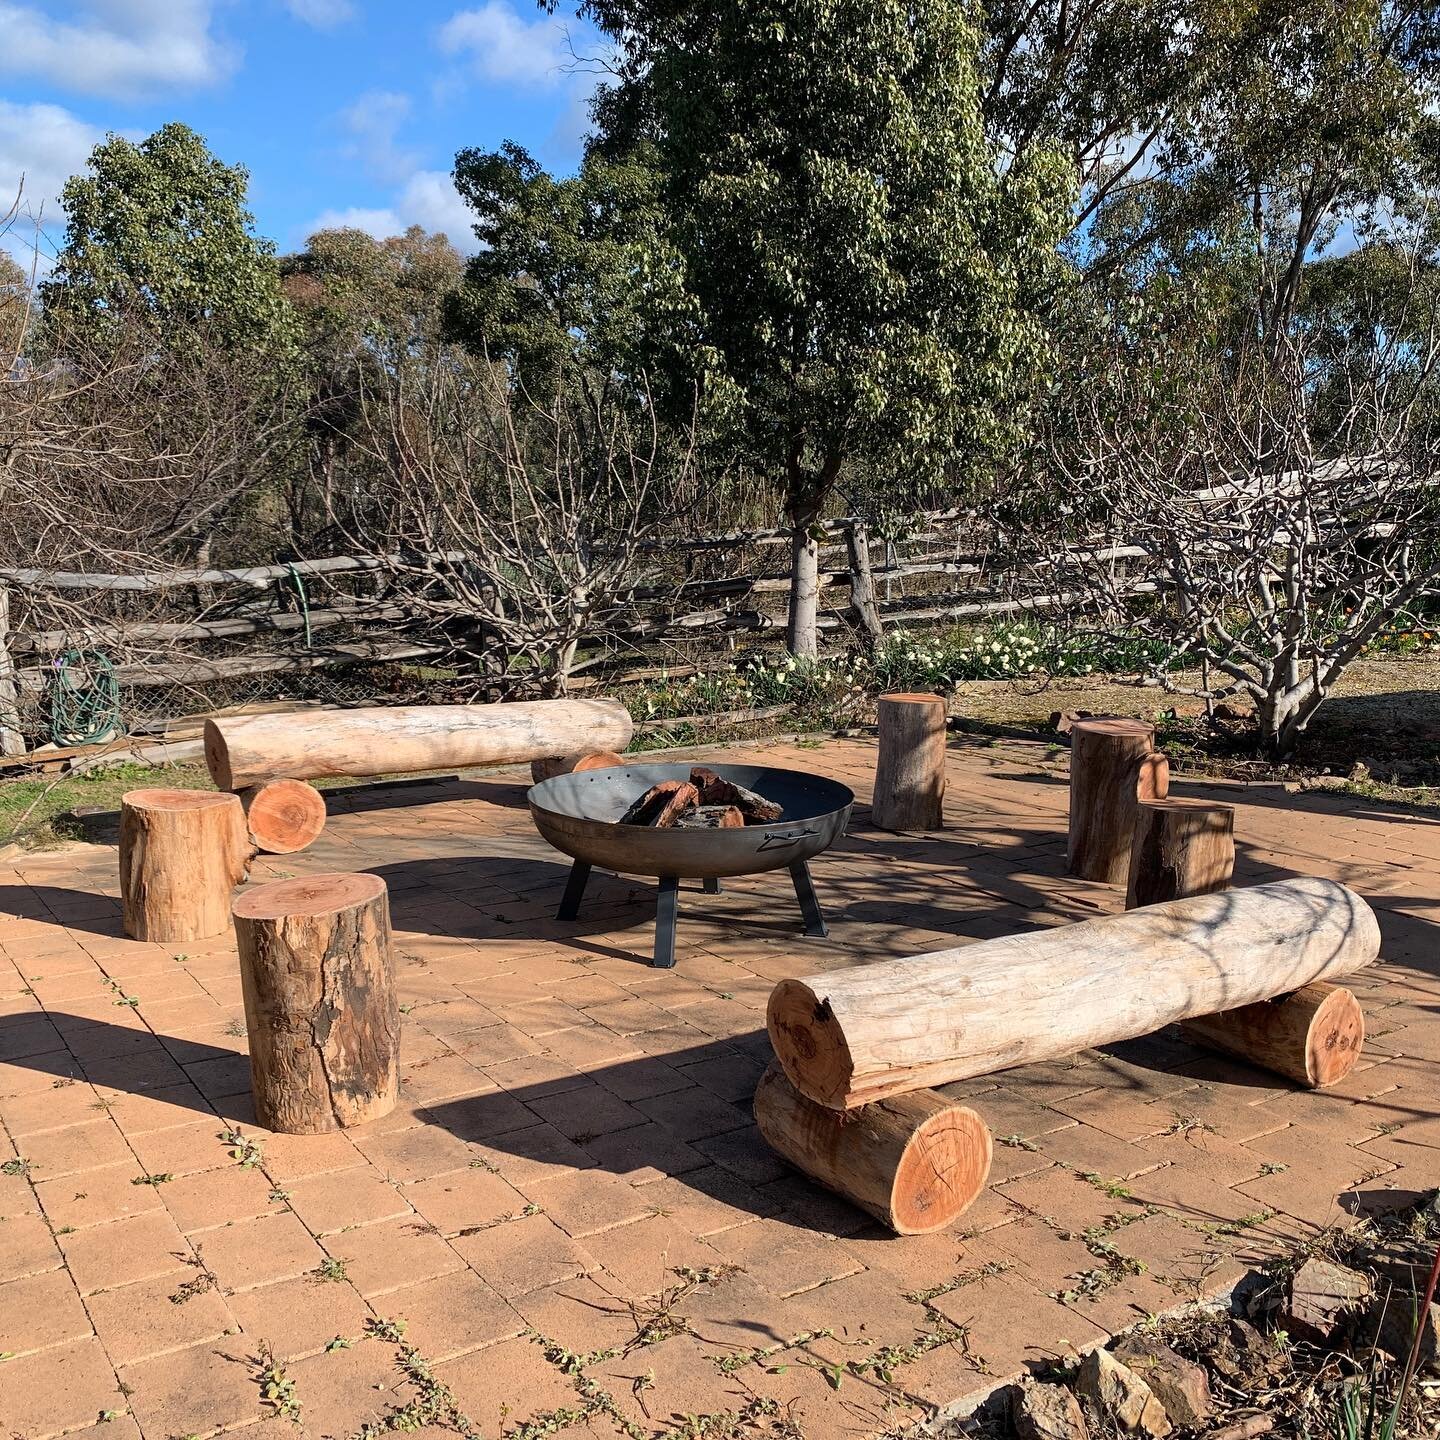 Check out our latest project at Yilawura🔥 

Our new fire pit is the perfect spot to get cozy and warm and toast some marshmallows on a winter&rsquo;s night.

📍 Glen Davis, Capertee Valley
🛌 Sleeps 6
🔥 Cosy log fire &amp; fire pit
🍽 Fully equippe